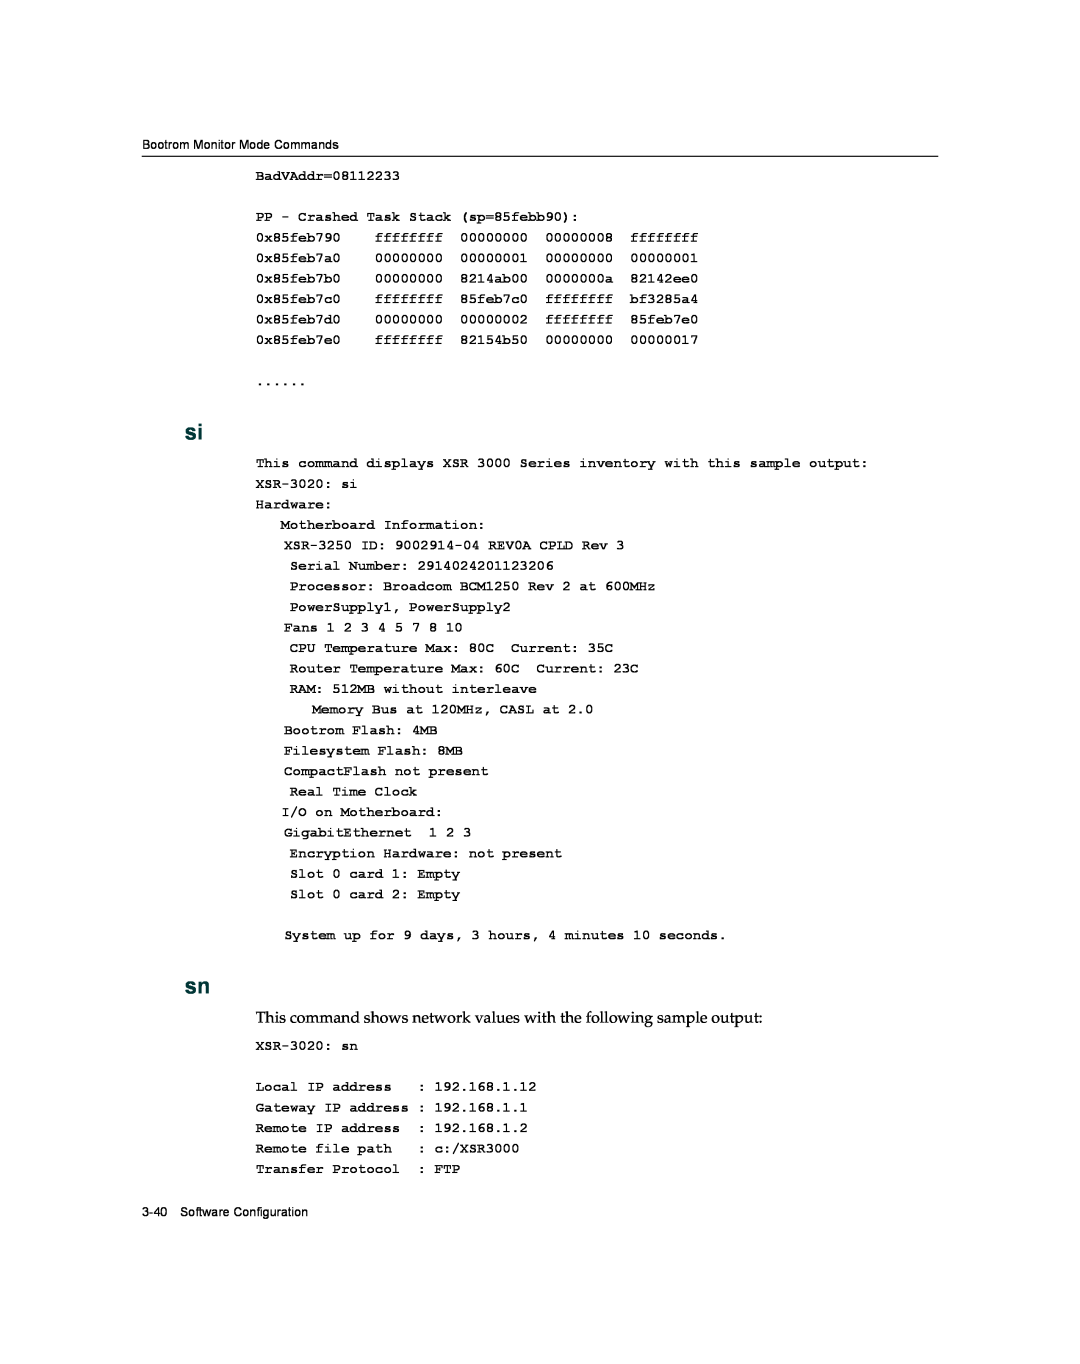 Enterasys Networks XSR-3020 manual This command shows network values with the following sample output 